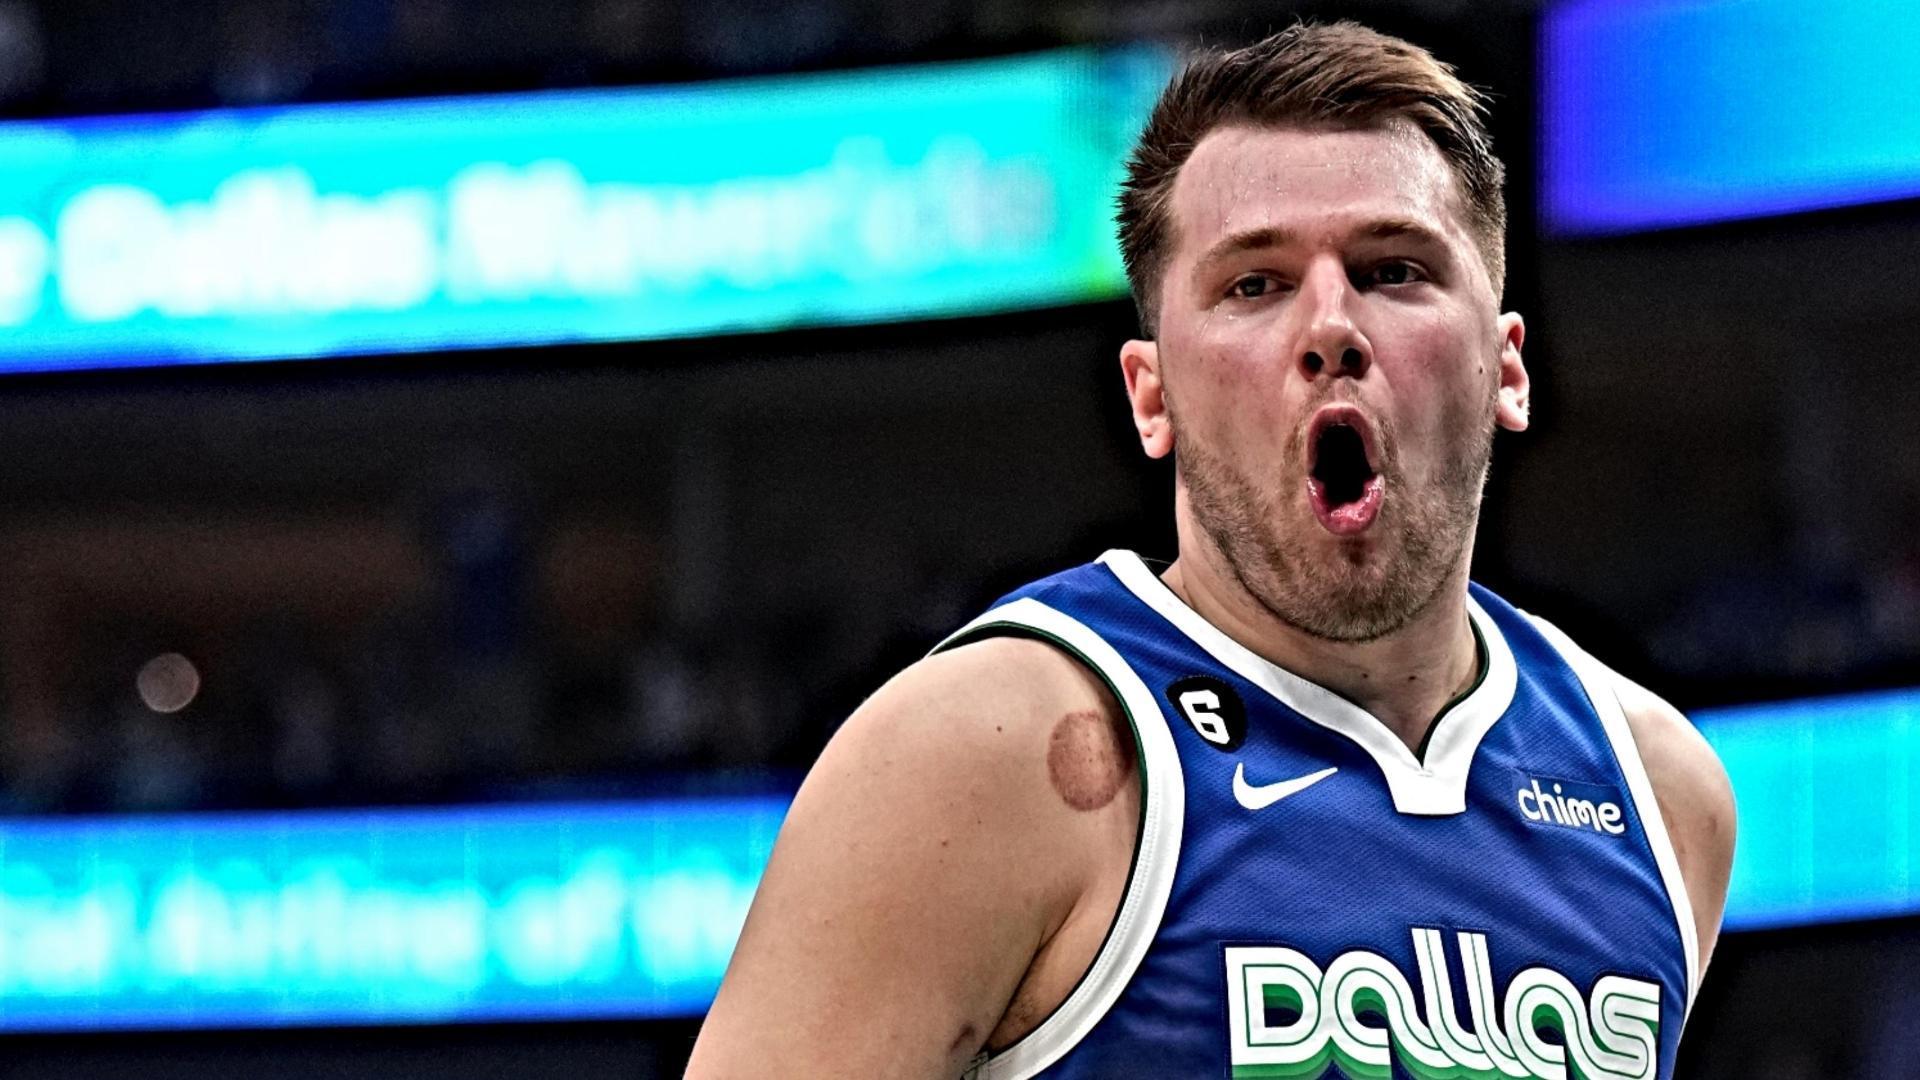 Inside the numbers of Luka Doncic's 60-point triple-double - The